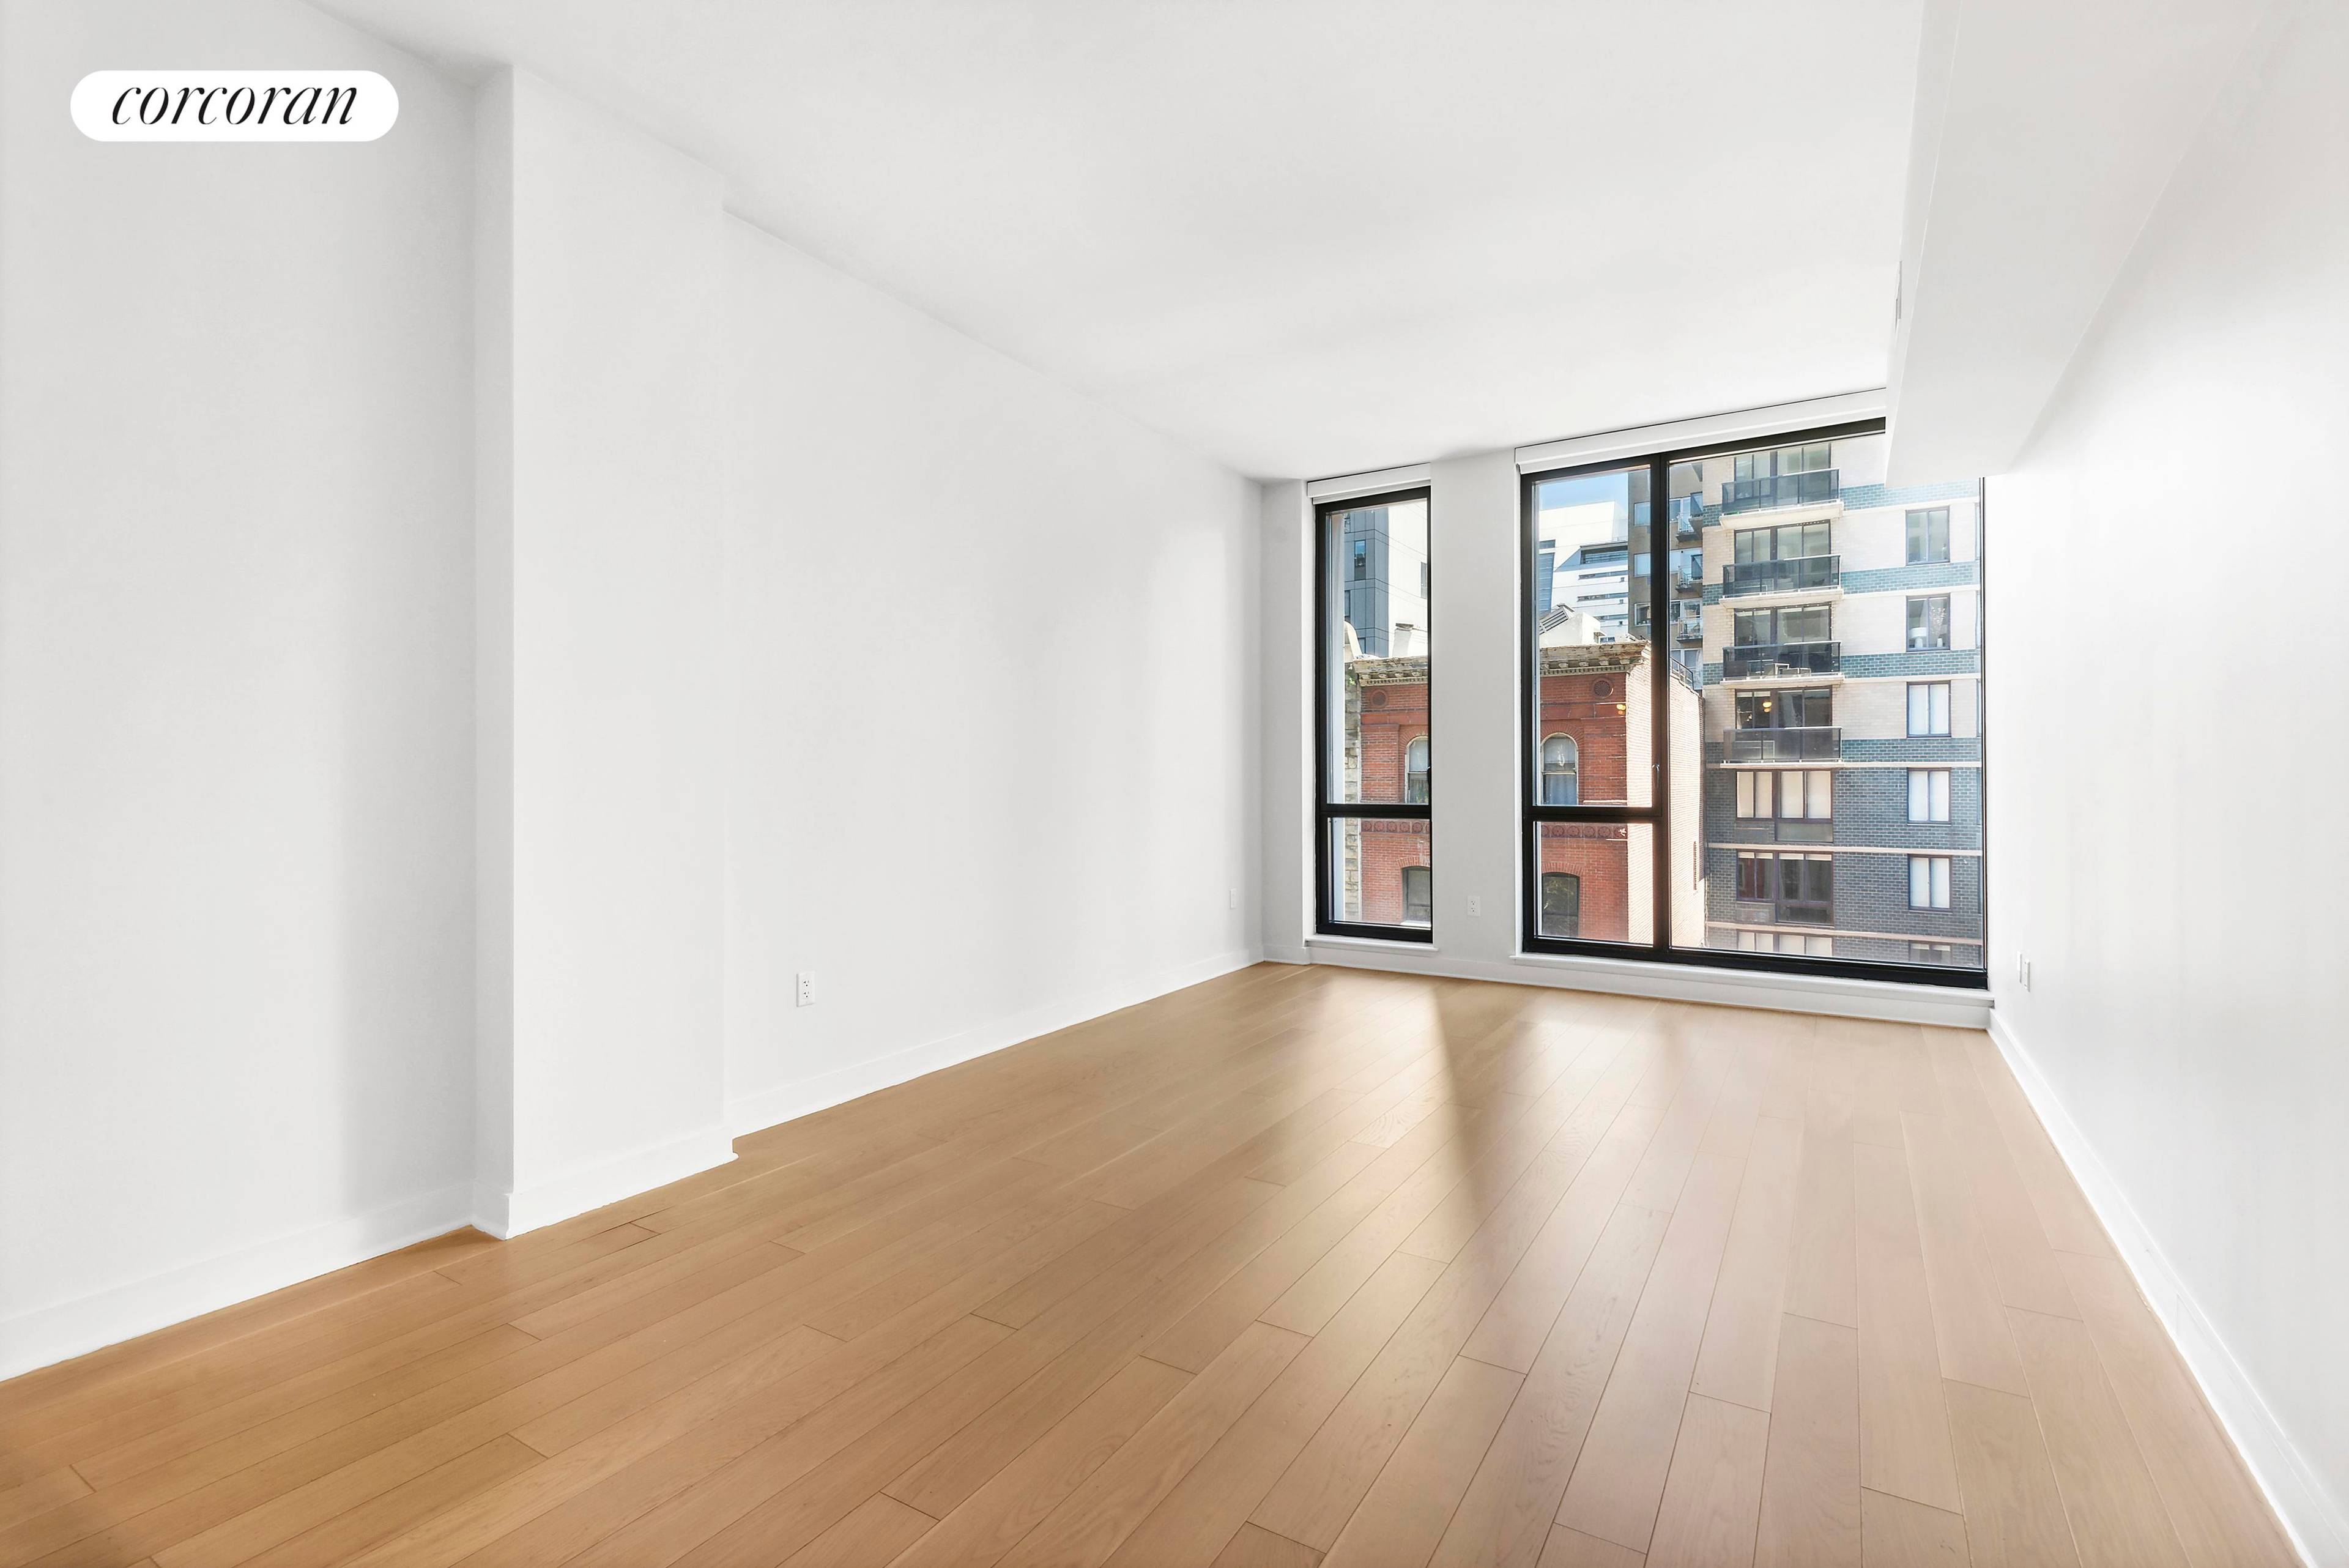 Welcome to Apartment 6A at 160 East 22nd Street, a spacious 1 bed 1 bath rental in the heart of Gramercy Park.